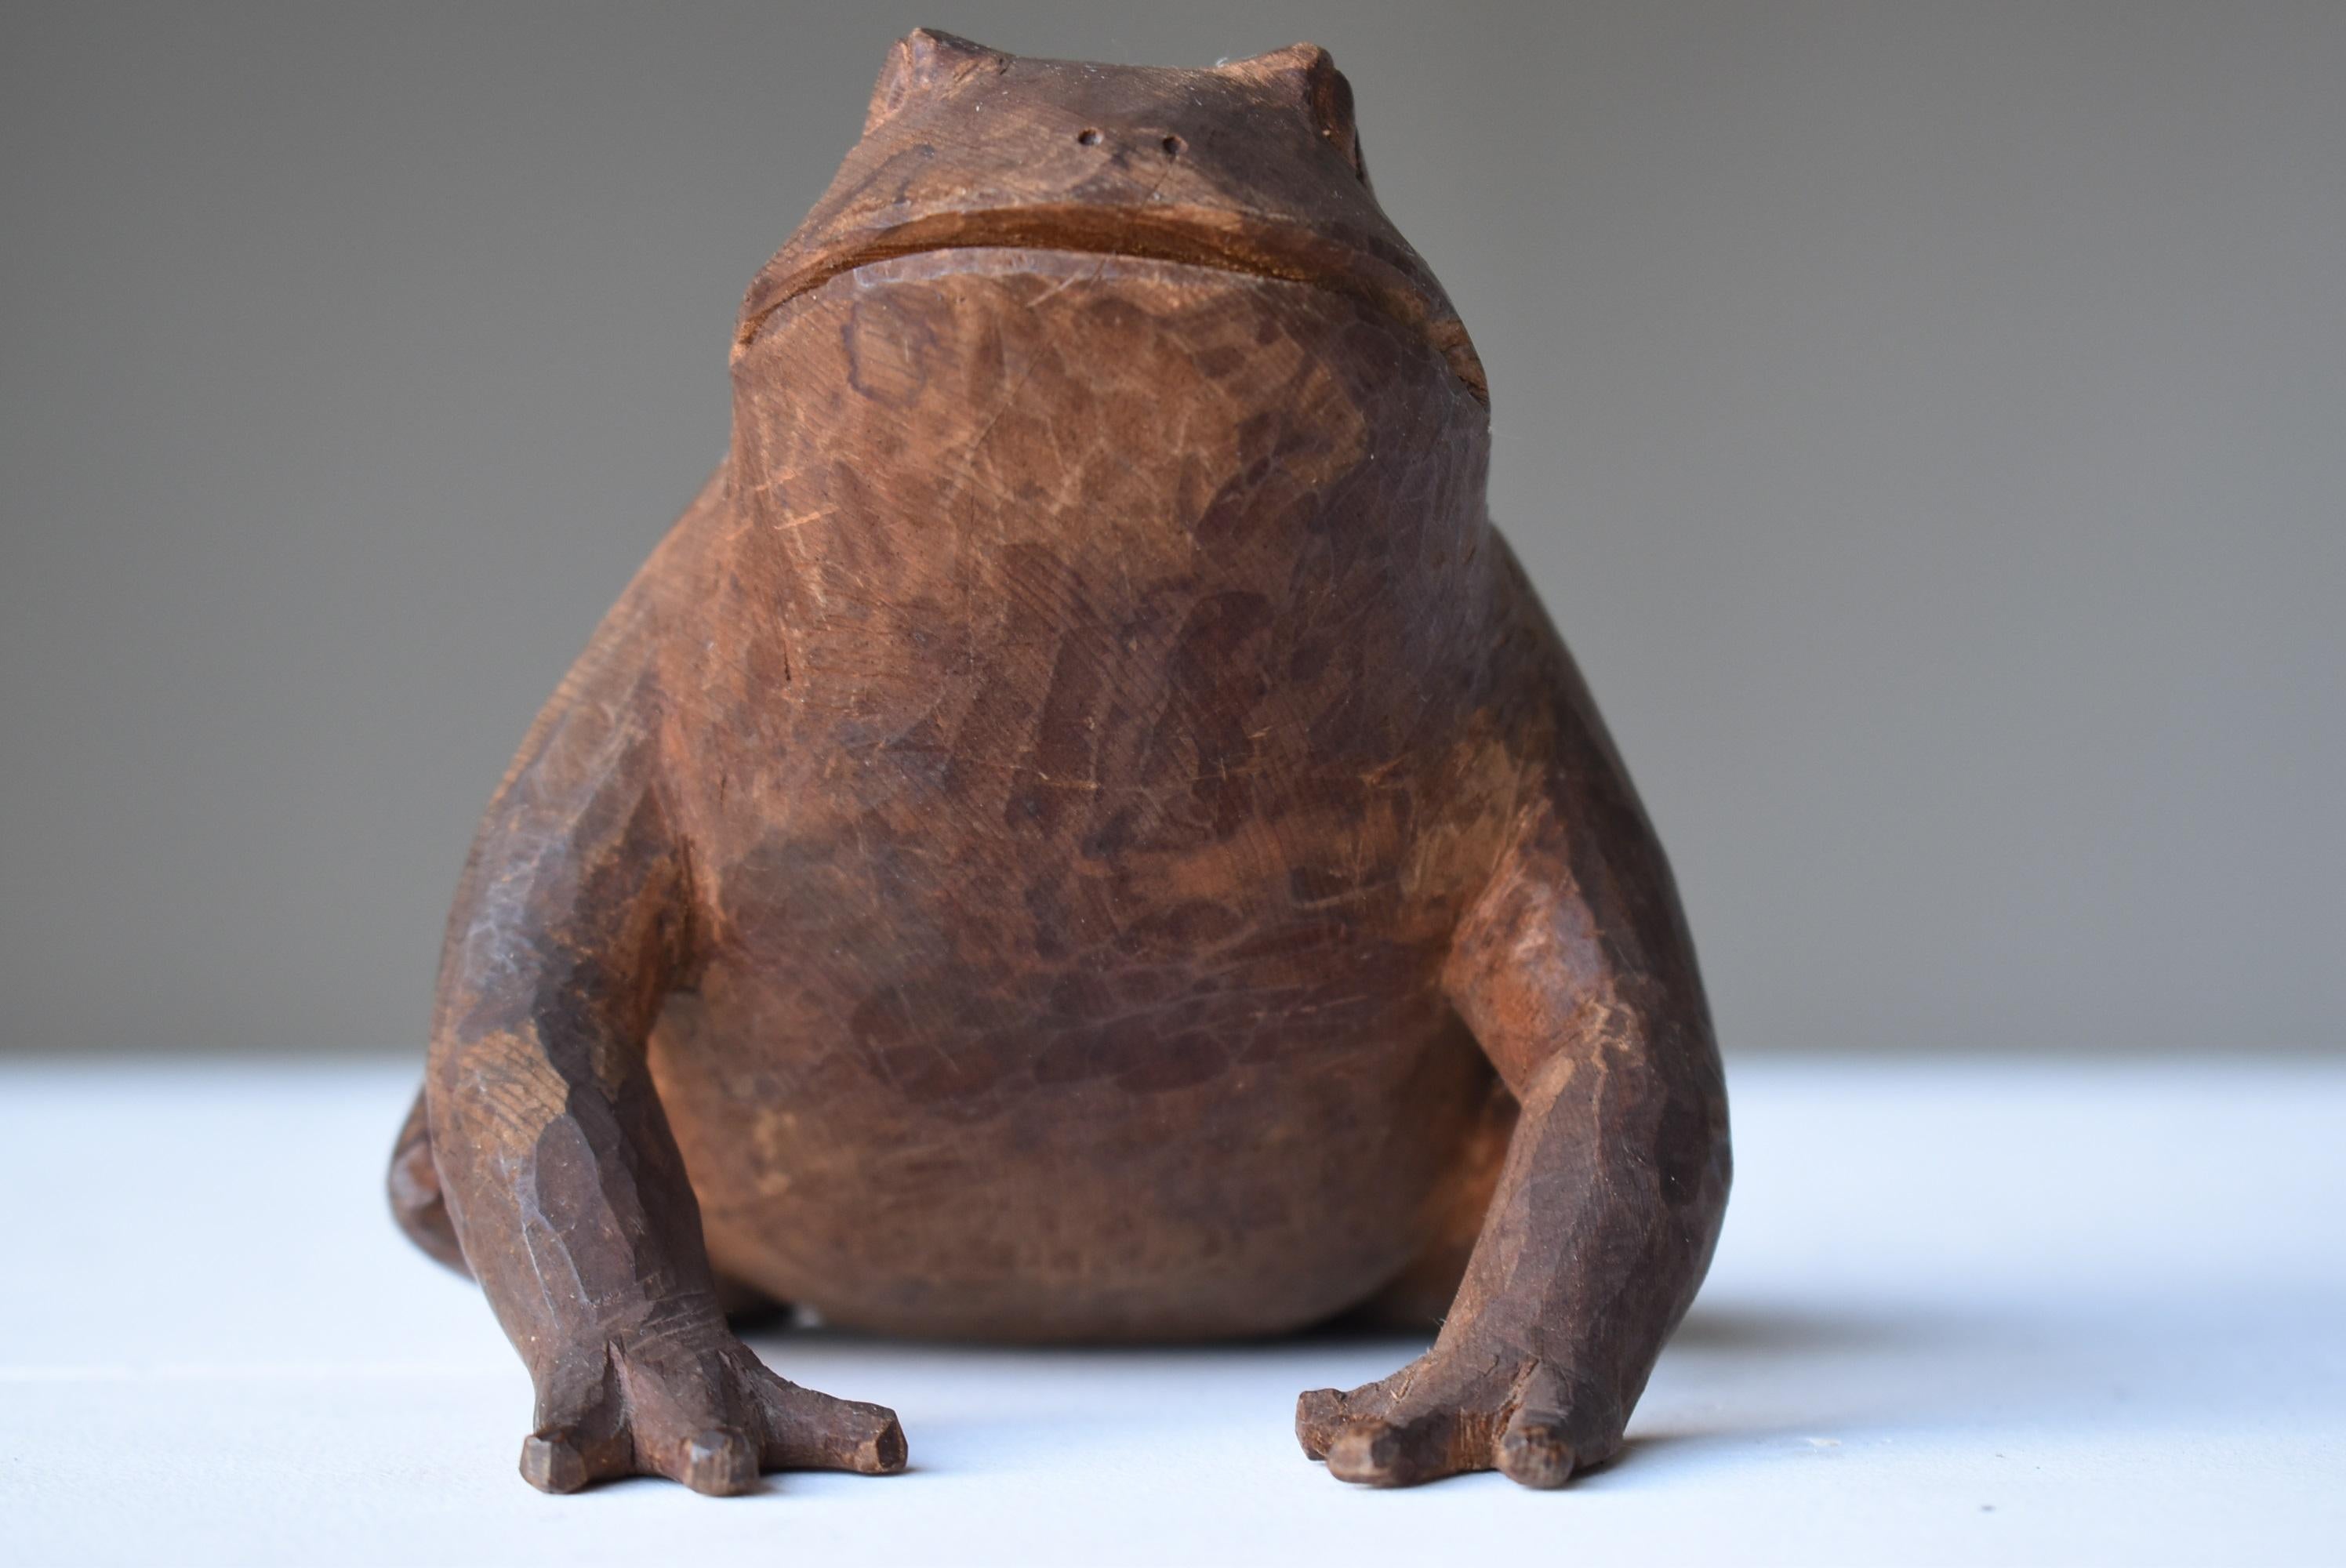 Japanese Antique Wood Carving Frog 1860s-1920s/sculpture Mingei Object 6